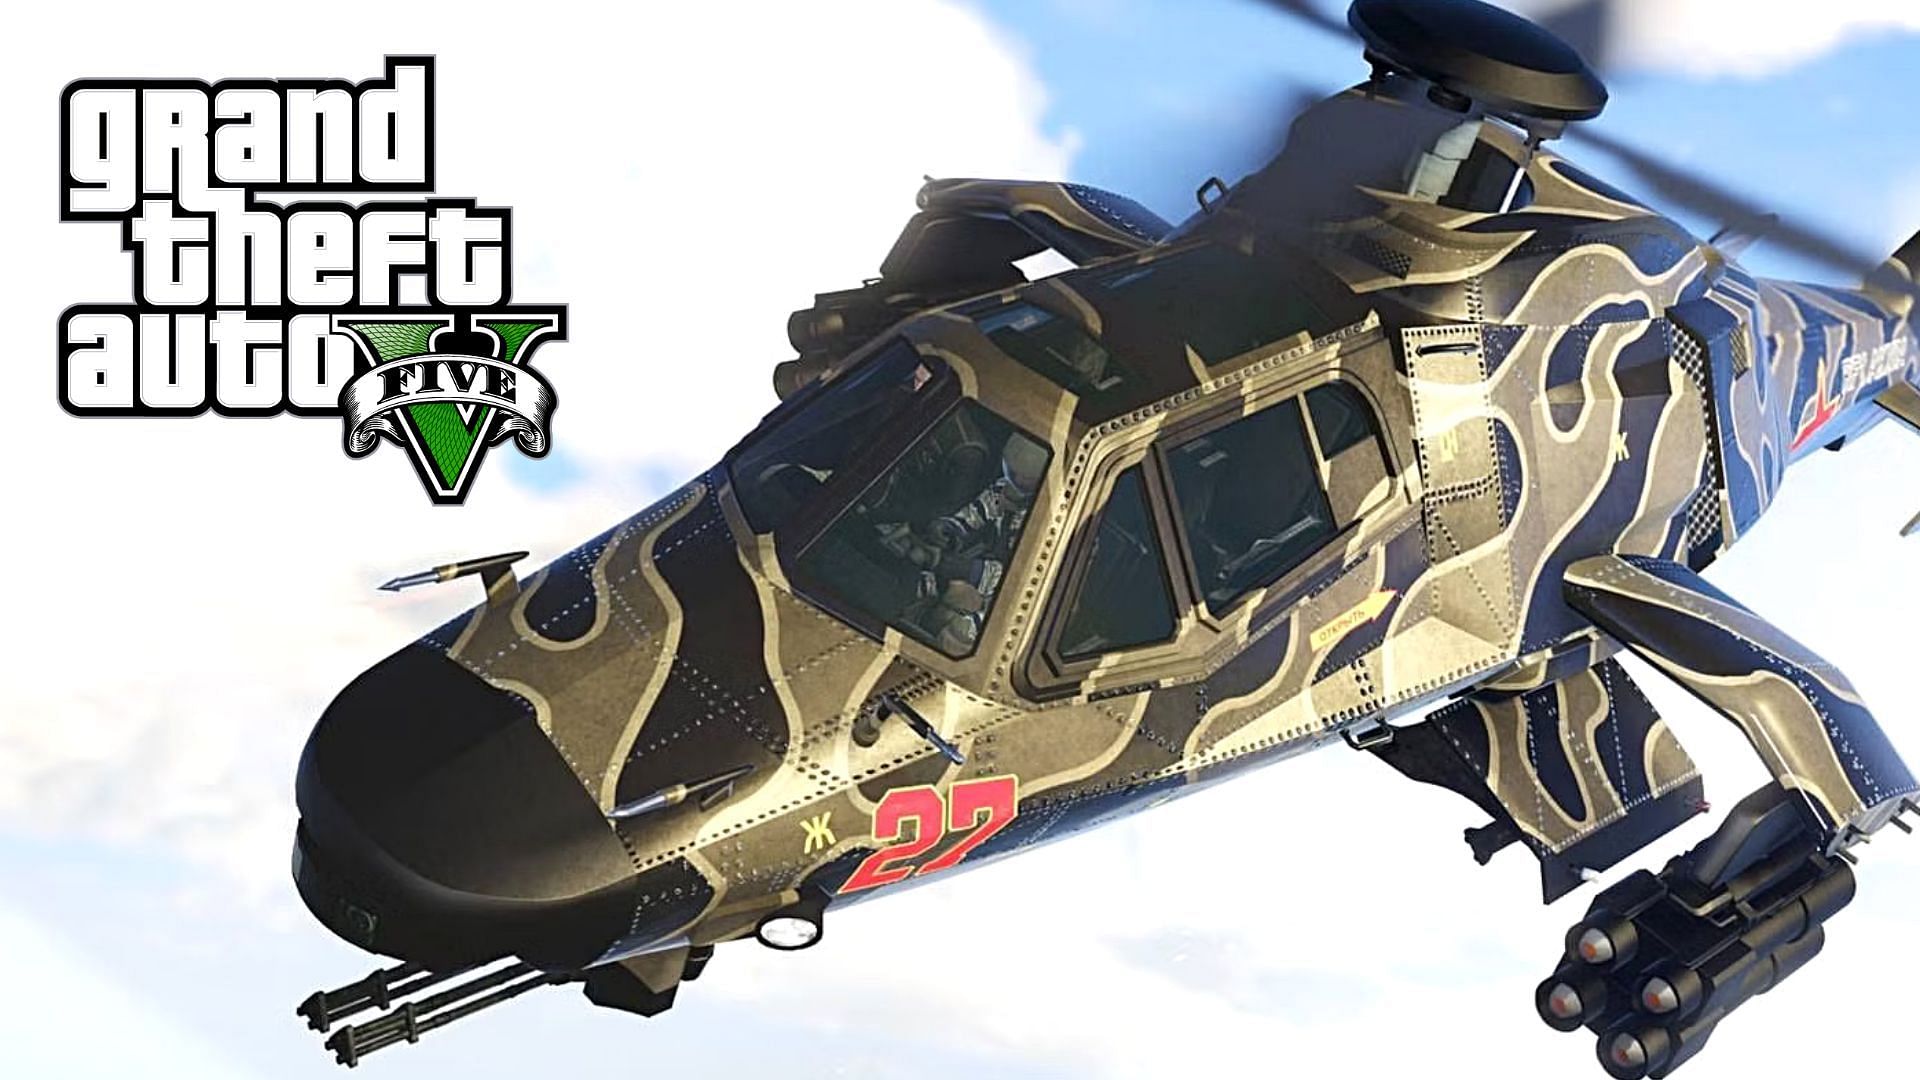 A brief about Akula, the the best helicopter in GTA Online for PvP encounters in the free roam (Image via Rockstar Games)